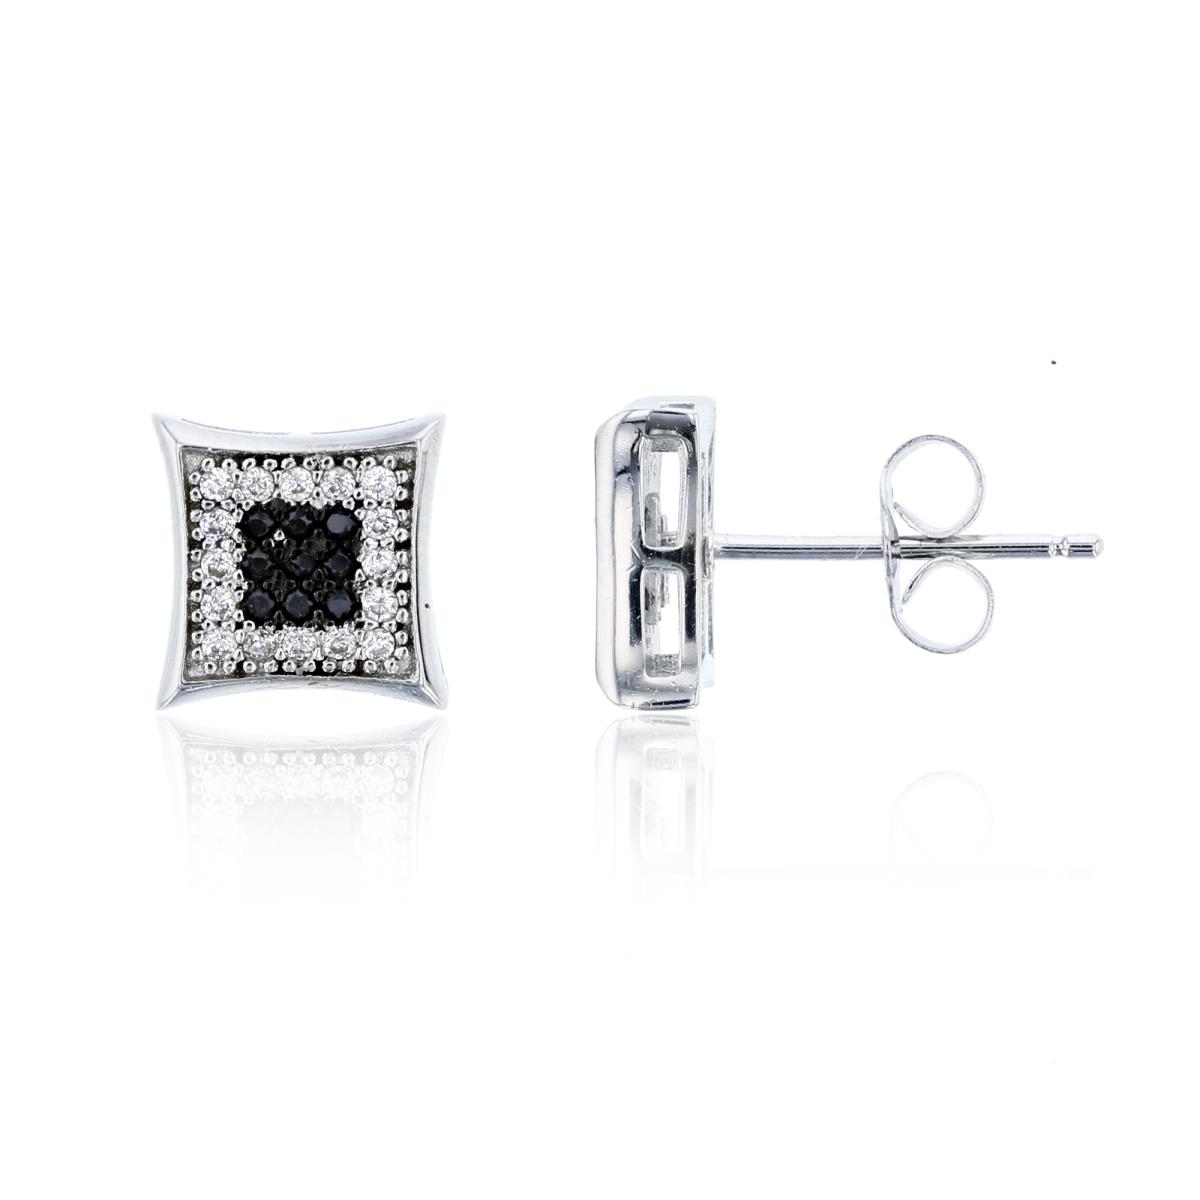 Sterling Silver Black & White 9.5x9.5mm Curved Square Micropave Stud Earring